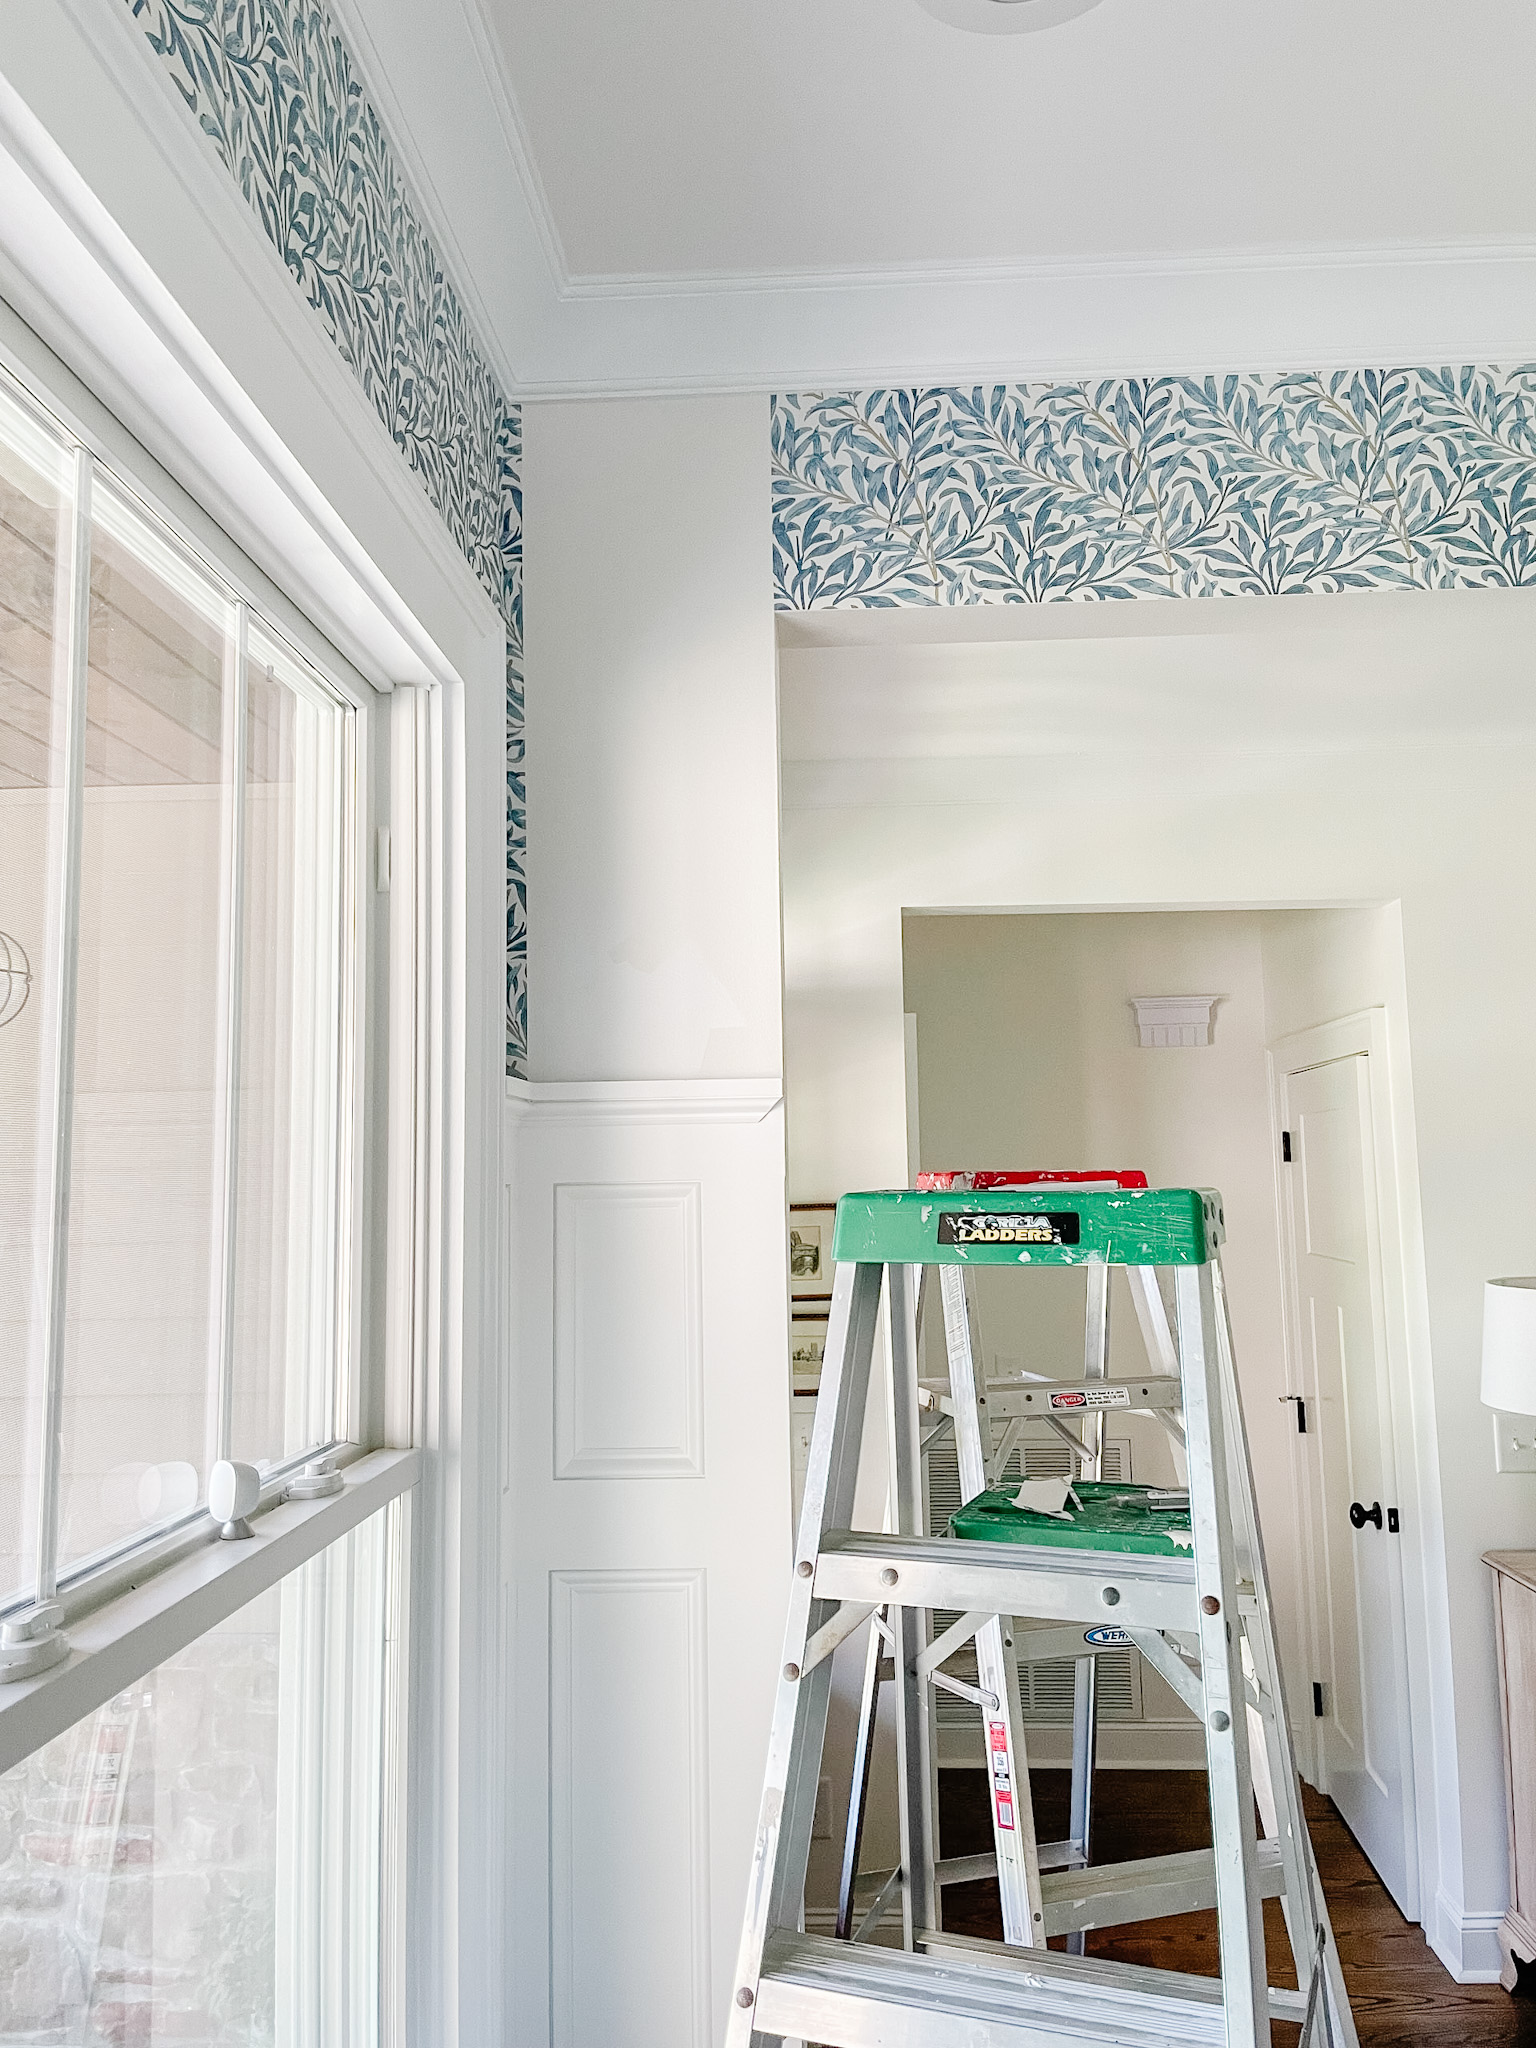 hanging wallpaper with ladder in room
installing wallpaper